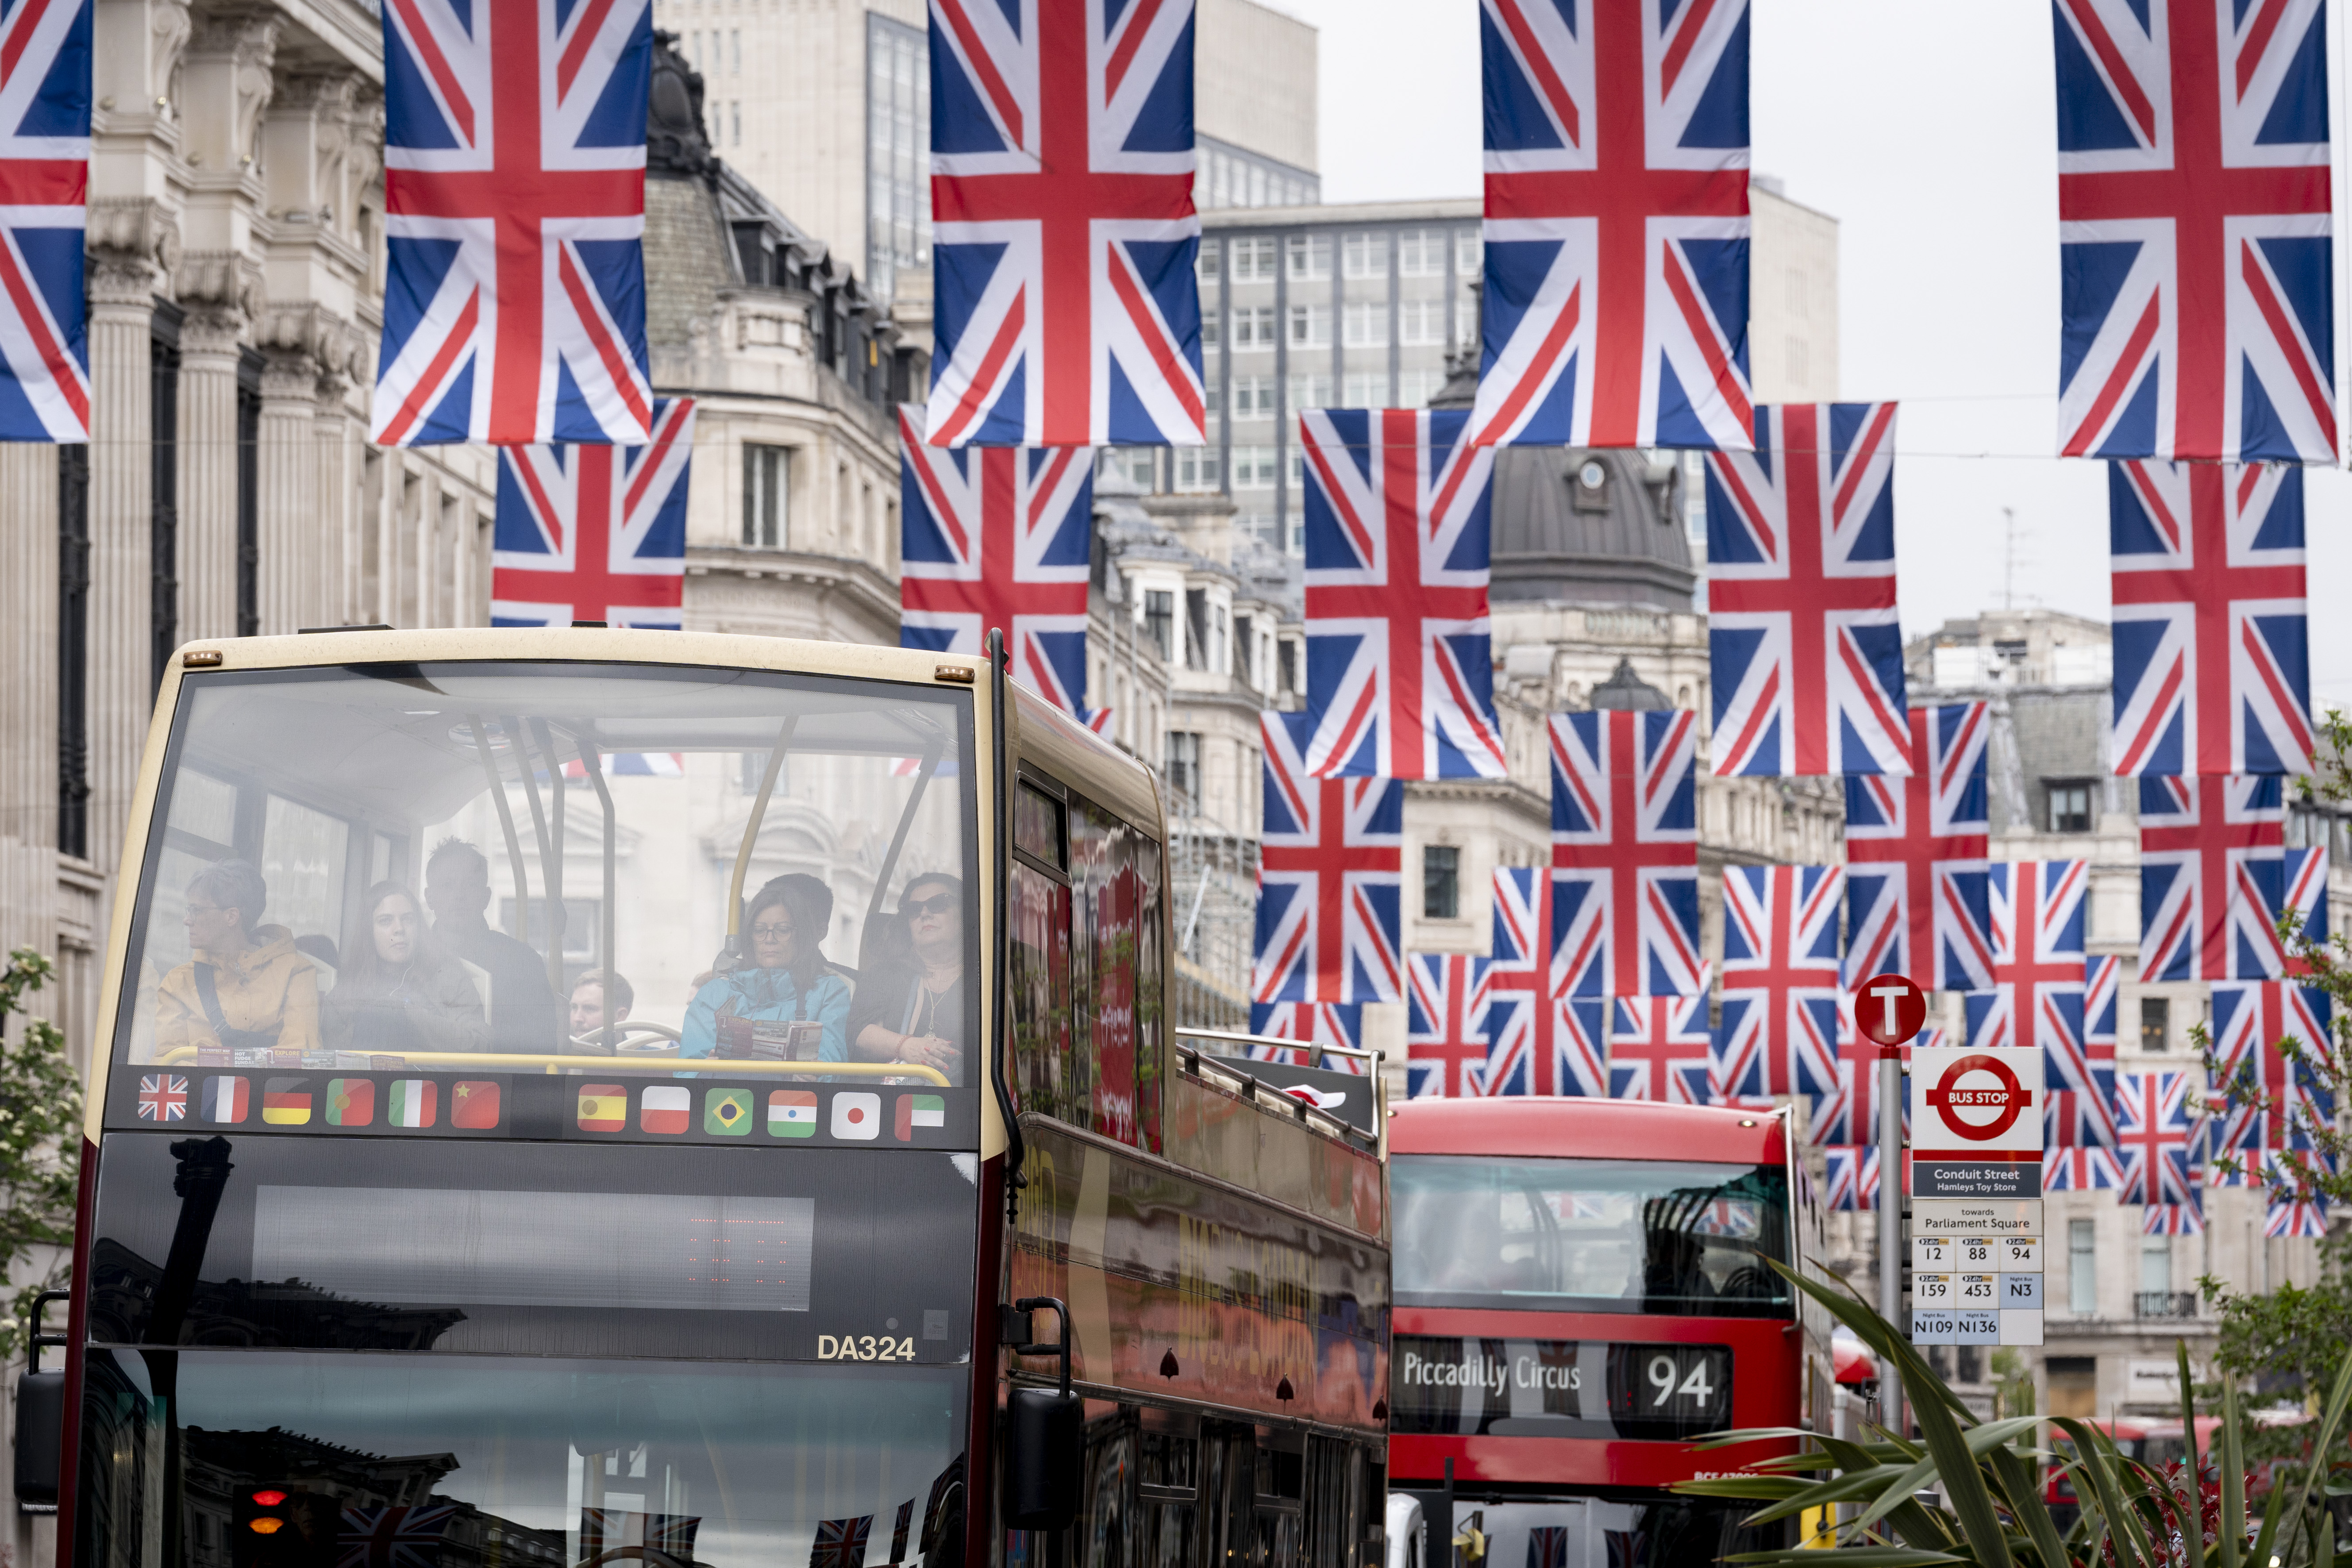 Union Jack flags flying in London